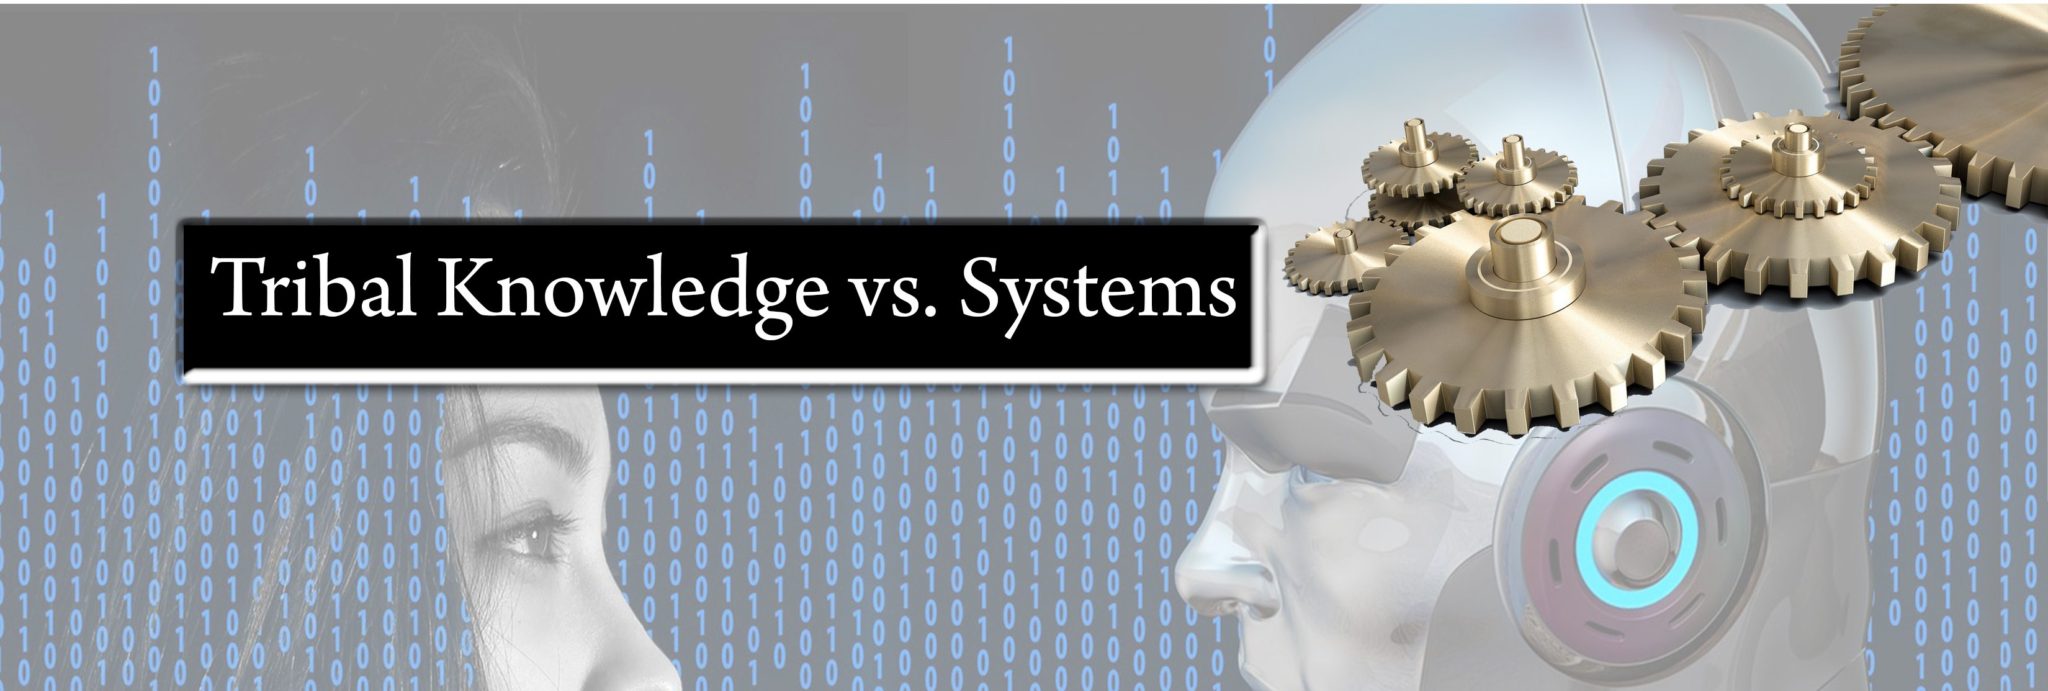 Tribal Knowledge vs. Systems